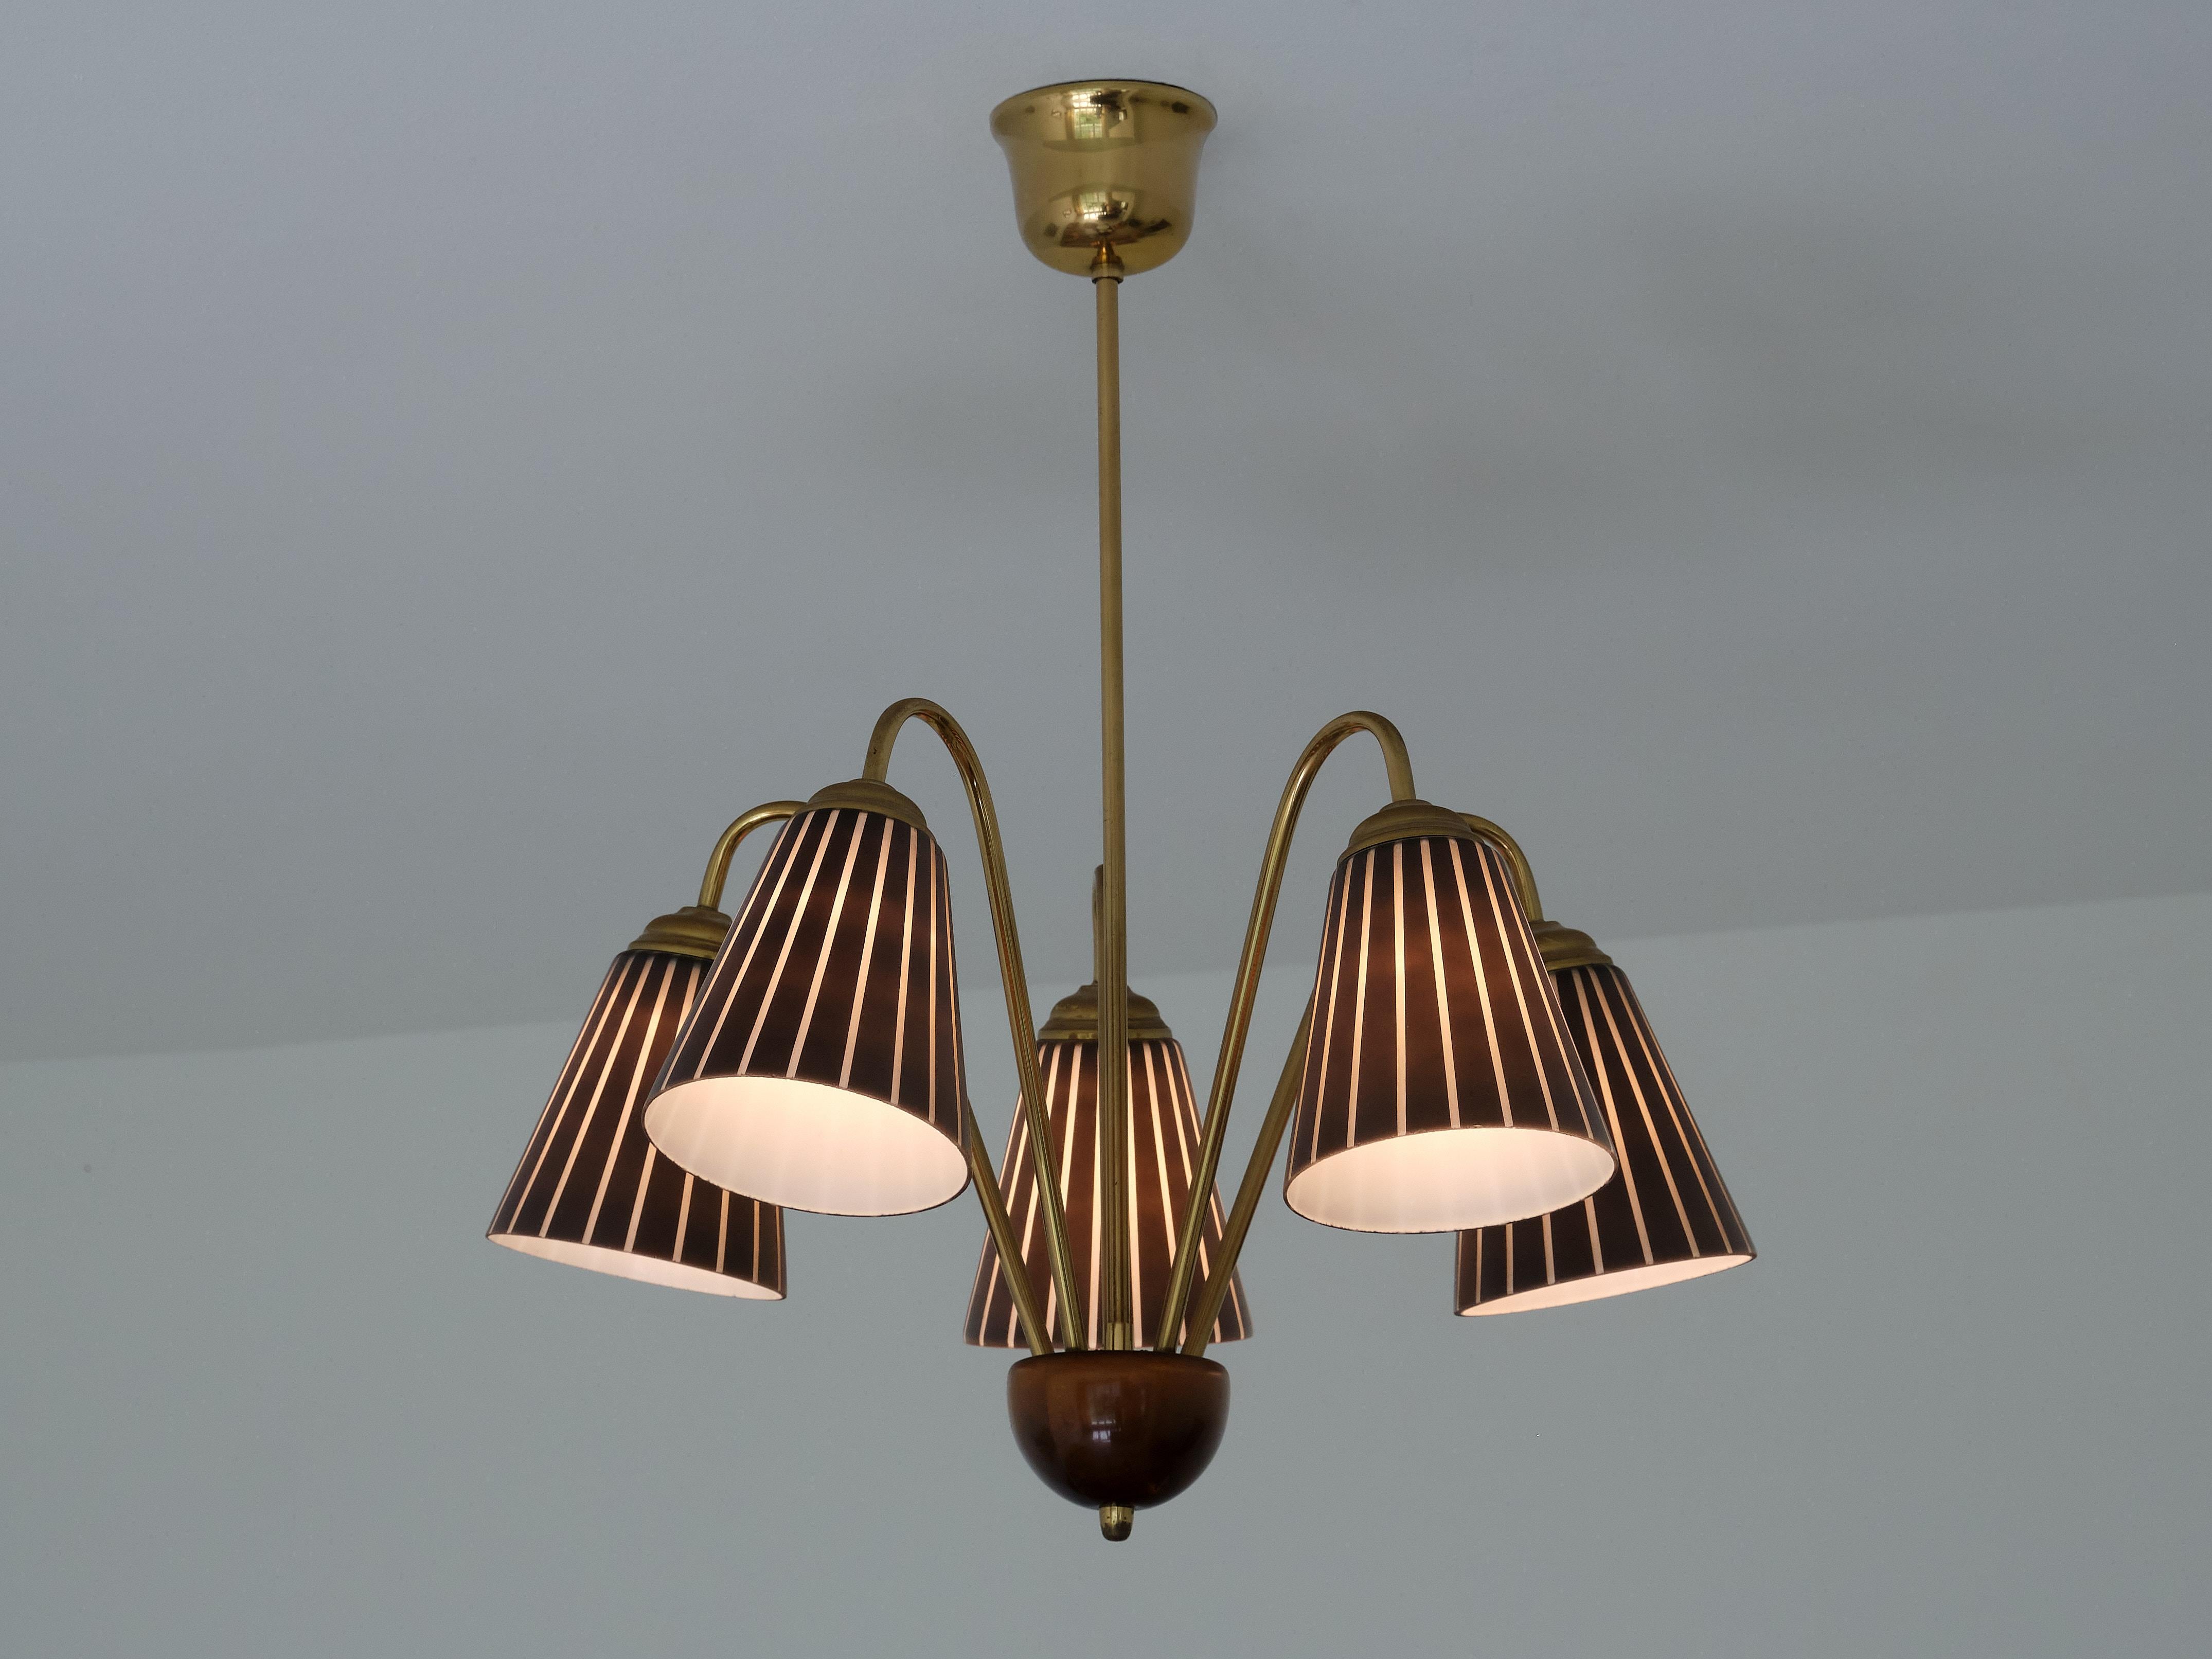 Nils Landberg Attributed Five Arm Chandelier in Striped Glass & Brass, Orrefors 7